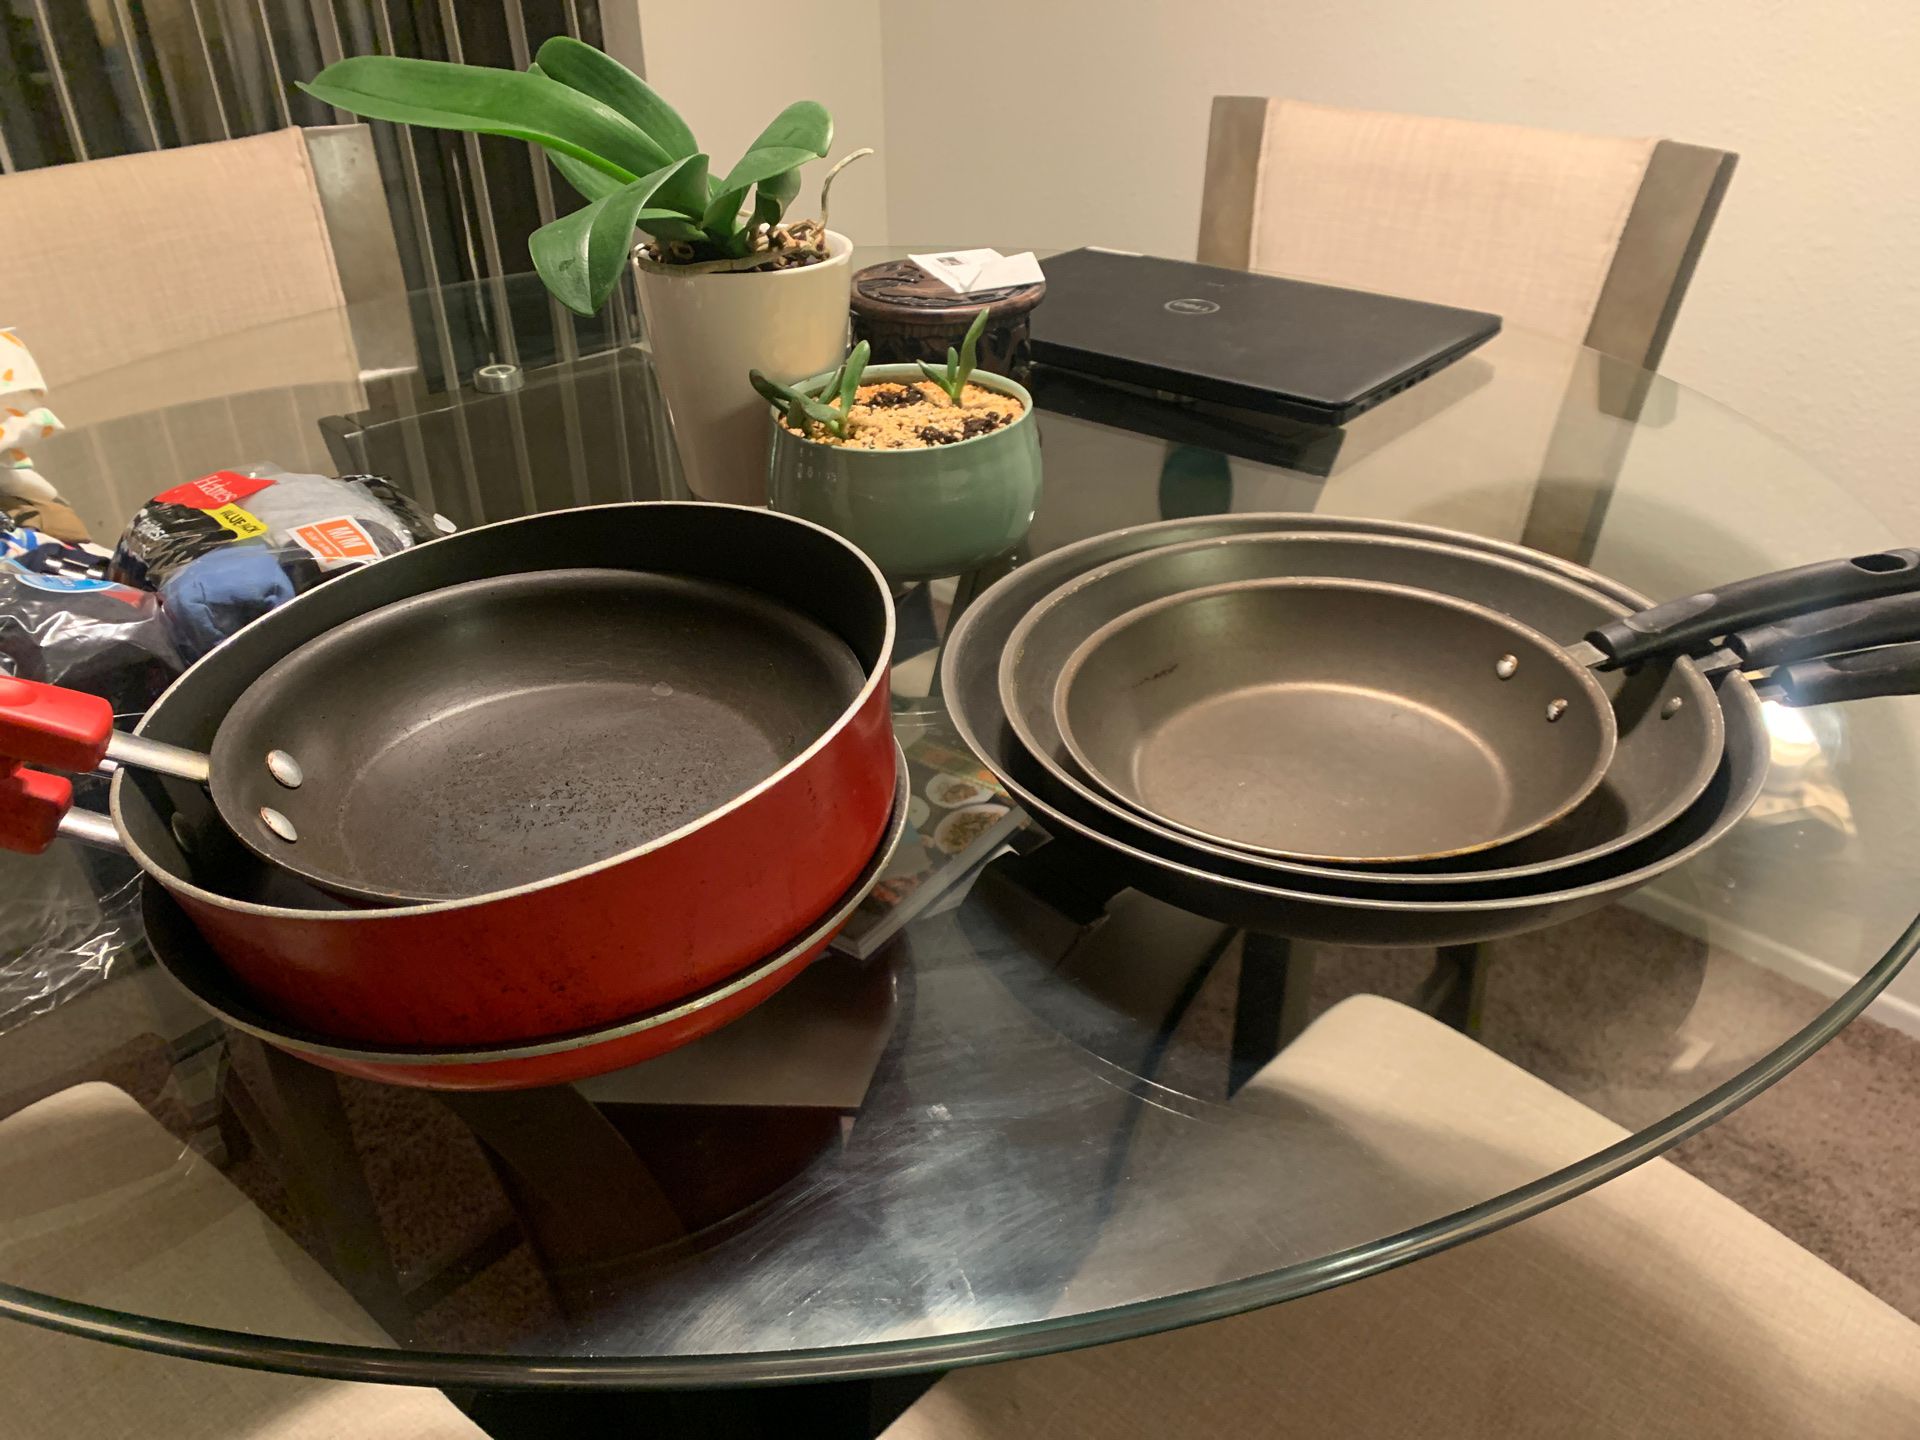 3 Rachel Ray Pans/Skillets and 3 Black Pans/Skillets